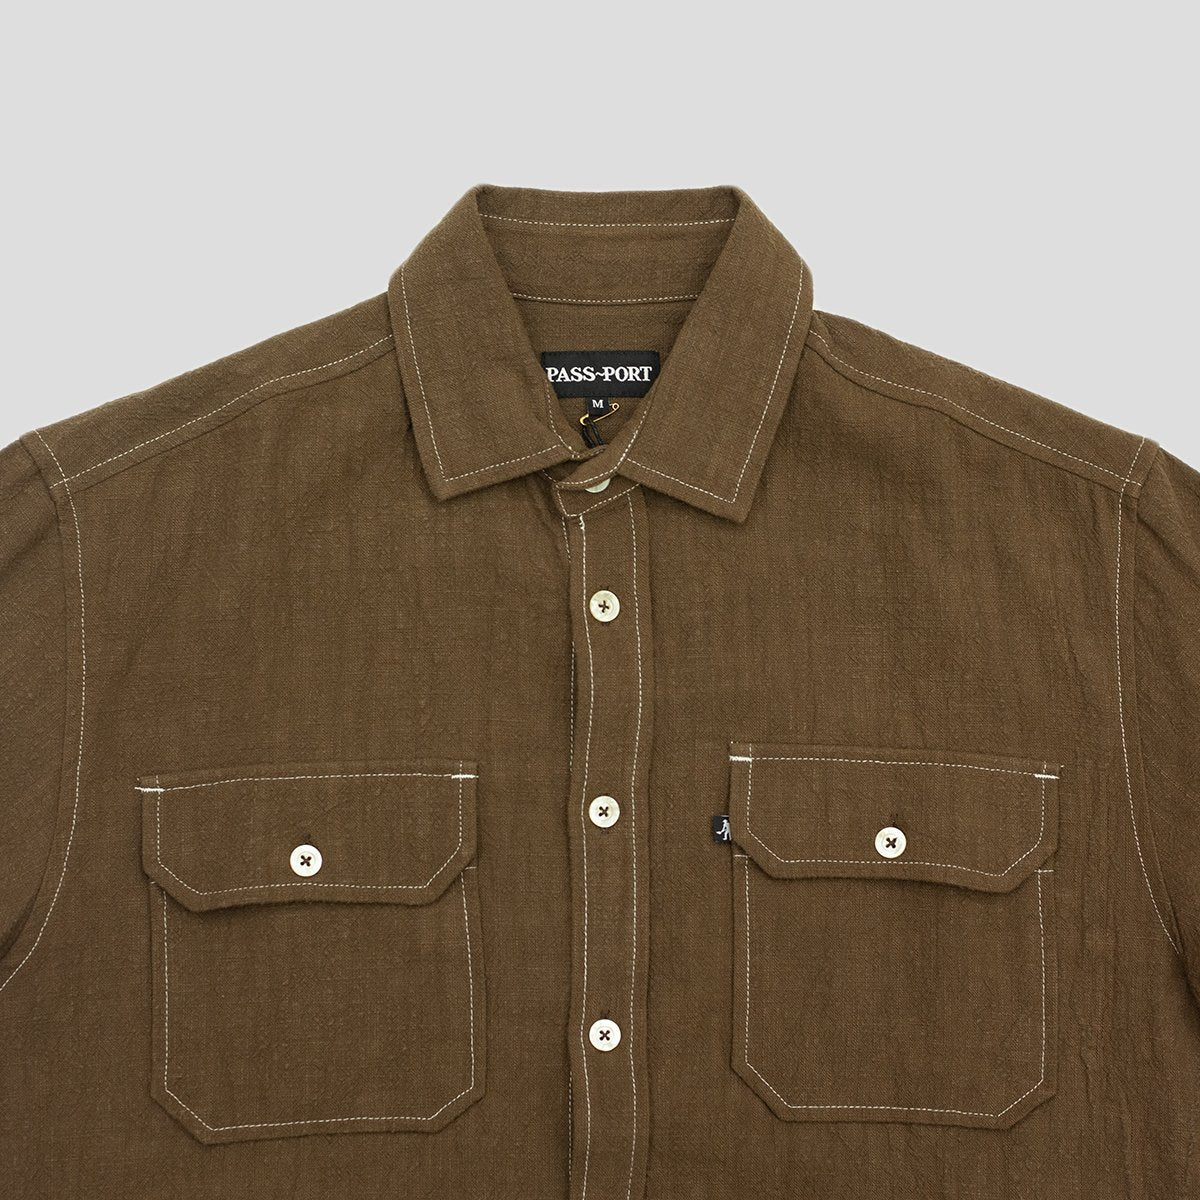 PASS~PORT "WORKERS CONTRAST" L/S SHIRT RUST